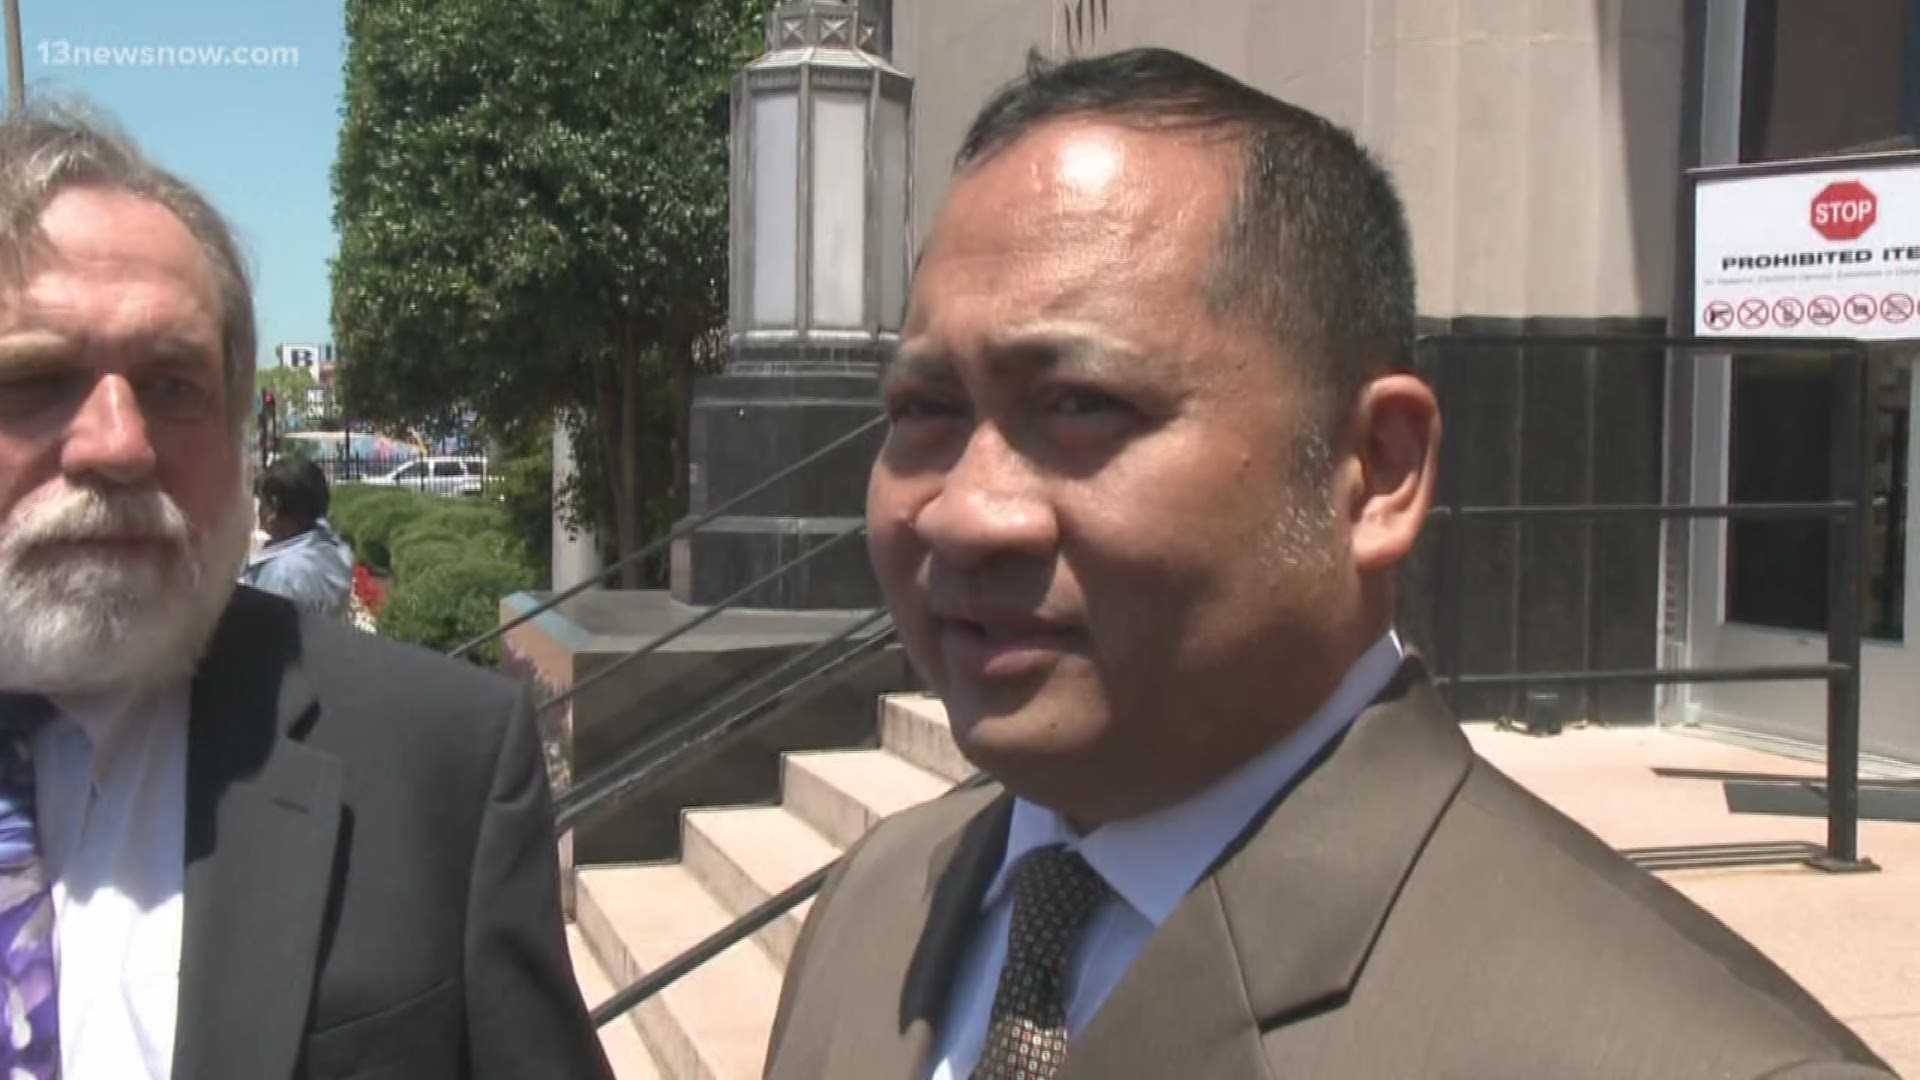 Ron Villanueva will spend two-and-a-half years in prison after he pleaded guilty in a fraud scheme that involved over $80 million in government money.